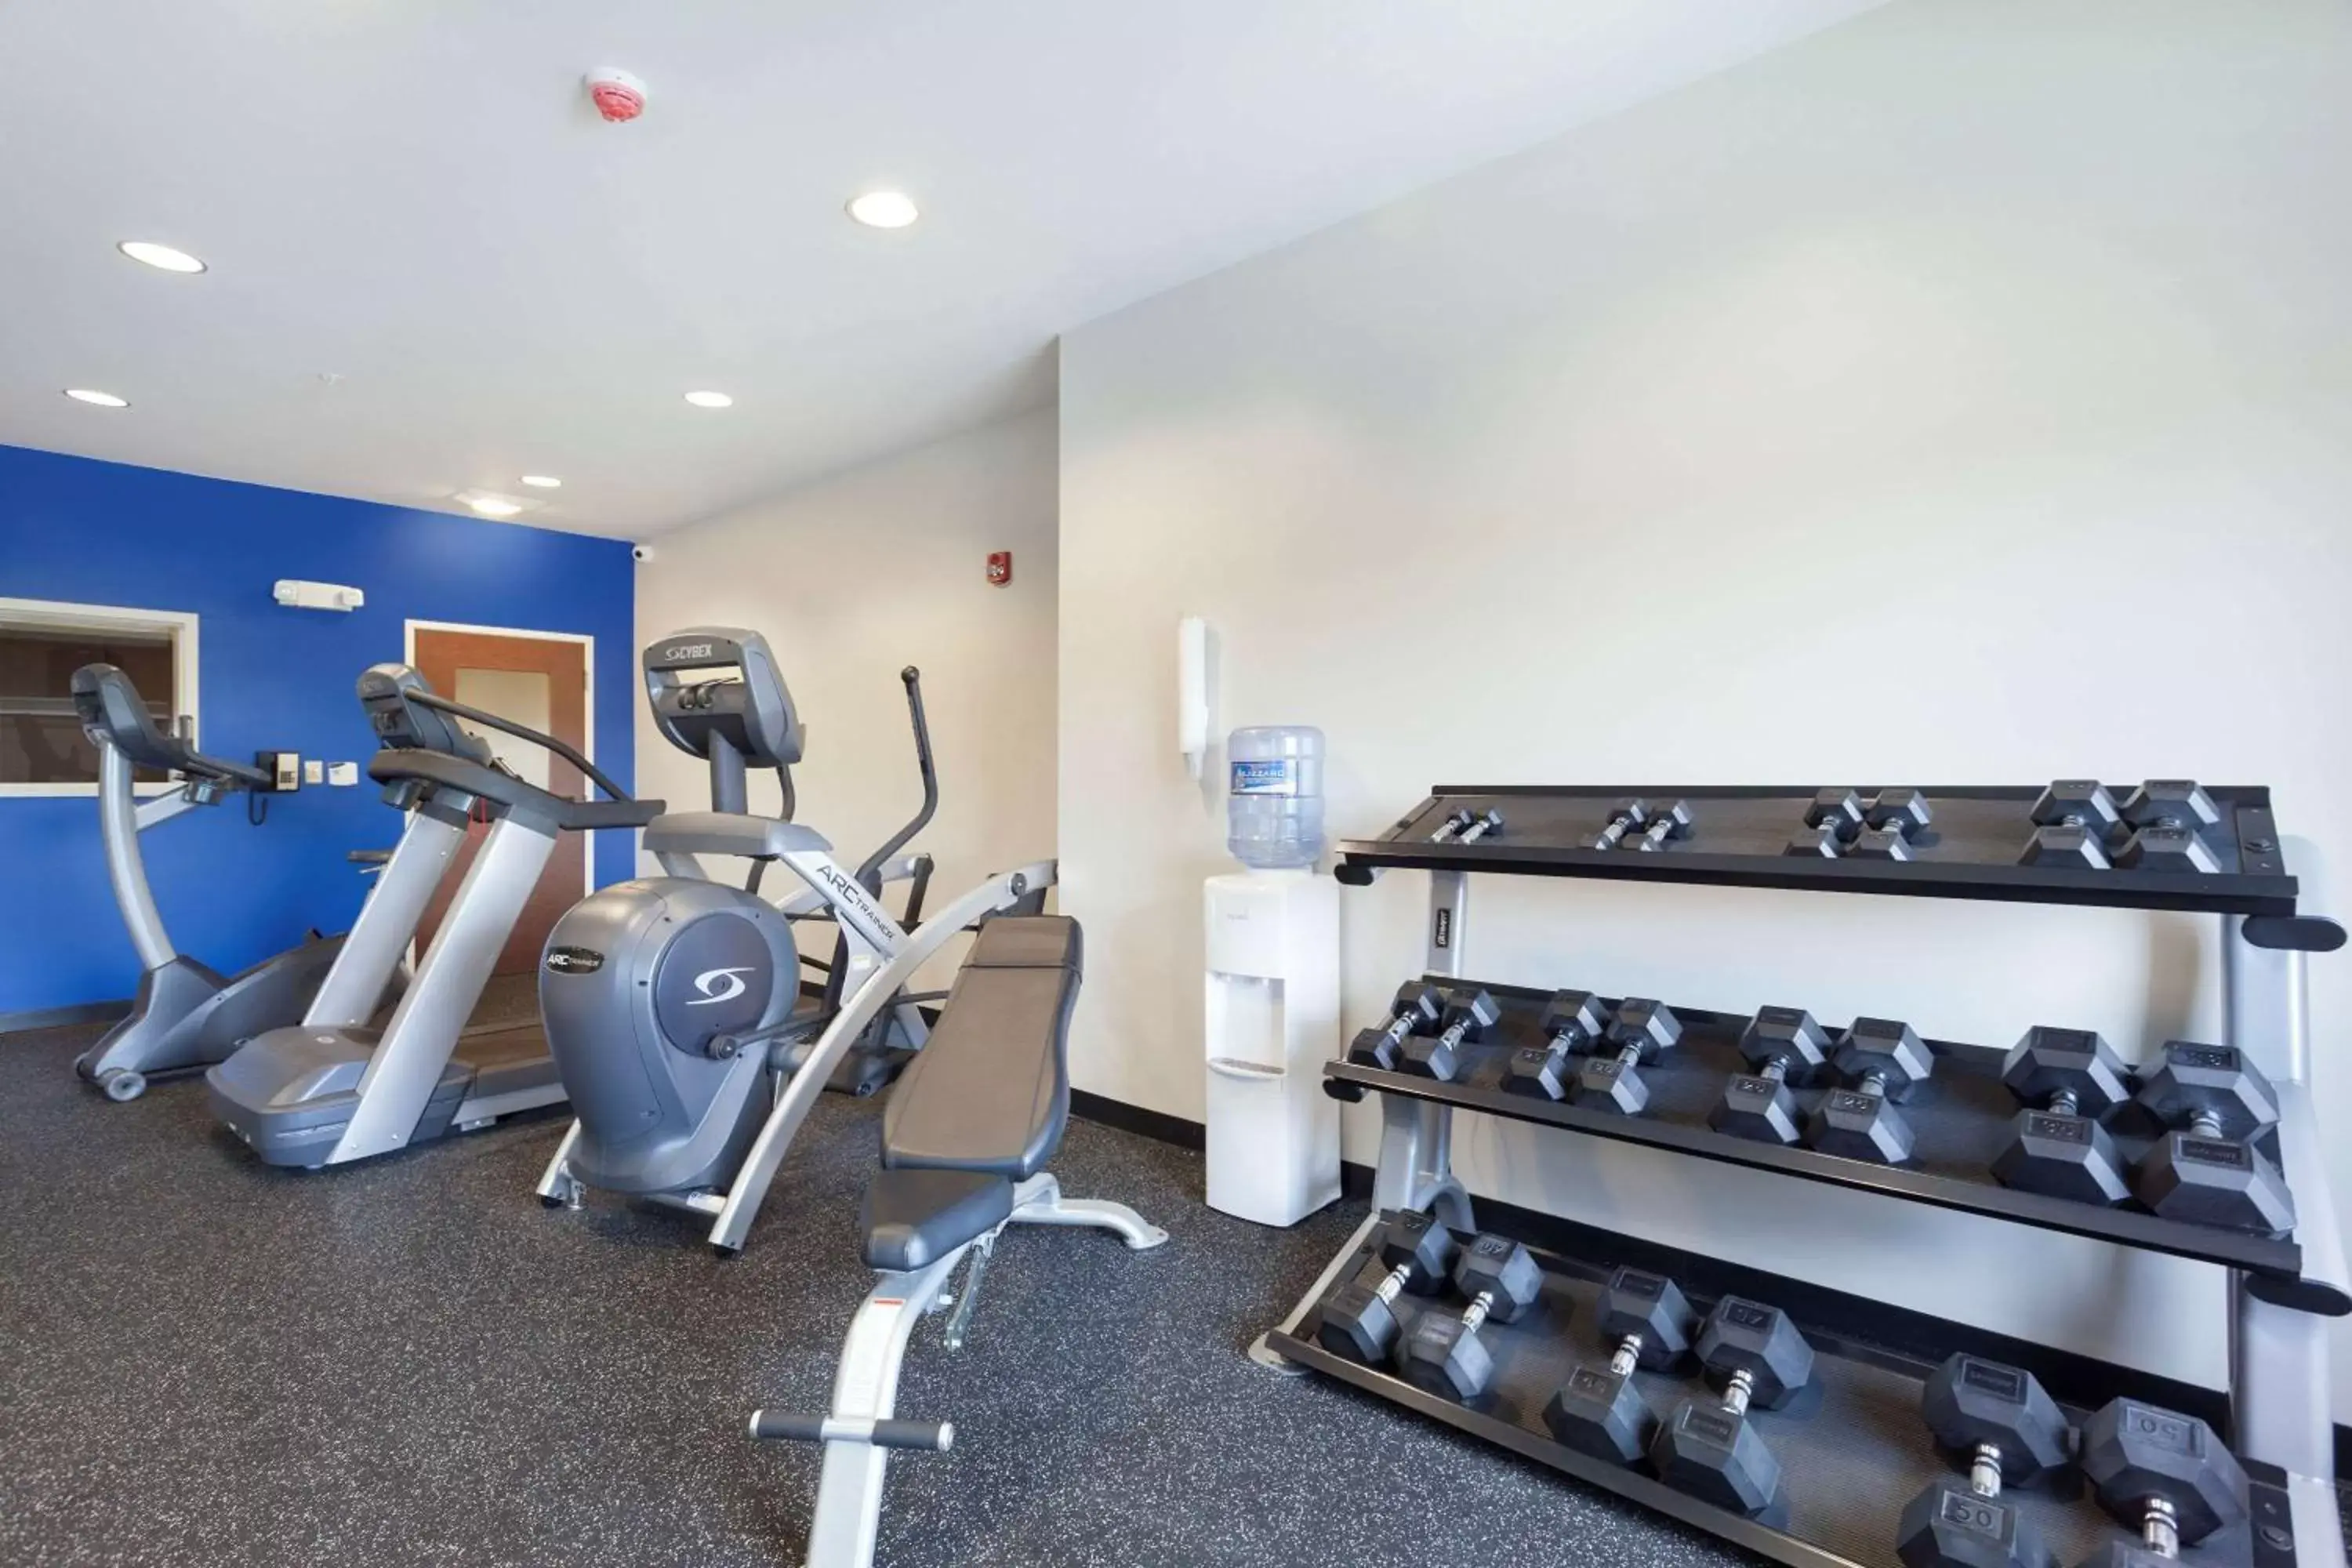 Fitness centre/facilities, Fitness Center/Facilities in Microtel Inn & Suites by Wyndham Georgetown Delaware Beaches